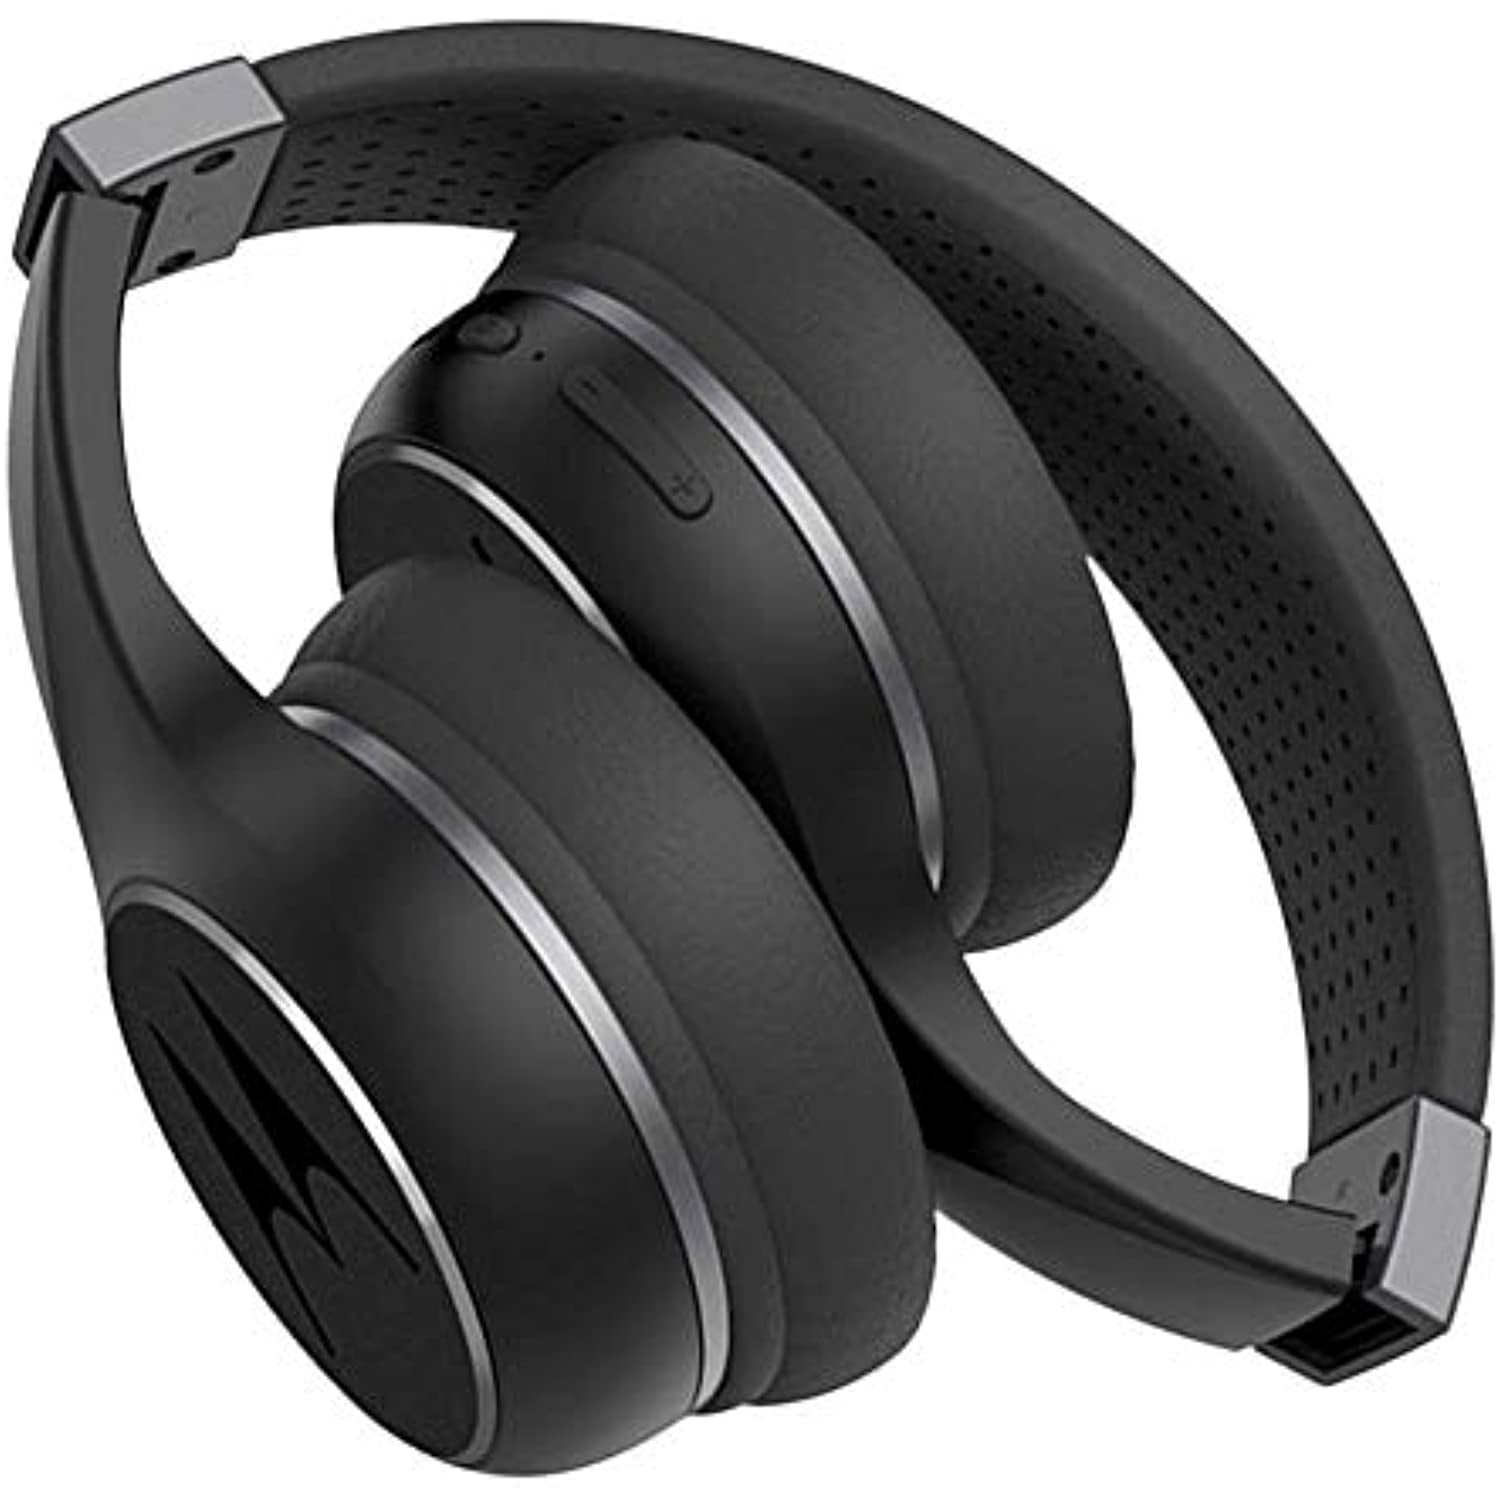 Leidinggevende Vruchtbaar levering Motorola Escape 220 - Wireless Bluetooth Headphones (HD Sound, Integrated  Microphone, 23 Hours of Playtime, Noise Isolation, Foldable and Compact),  Black (Renewed) - Walmart.com